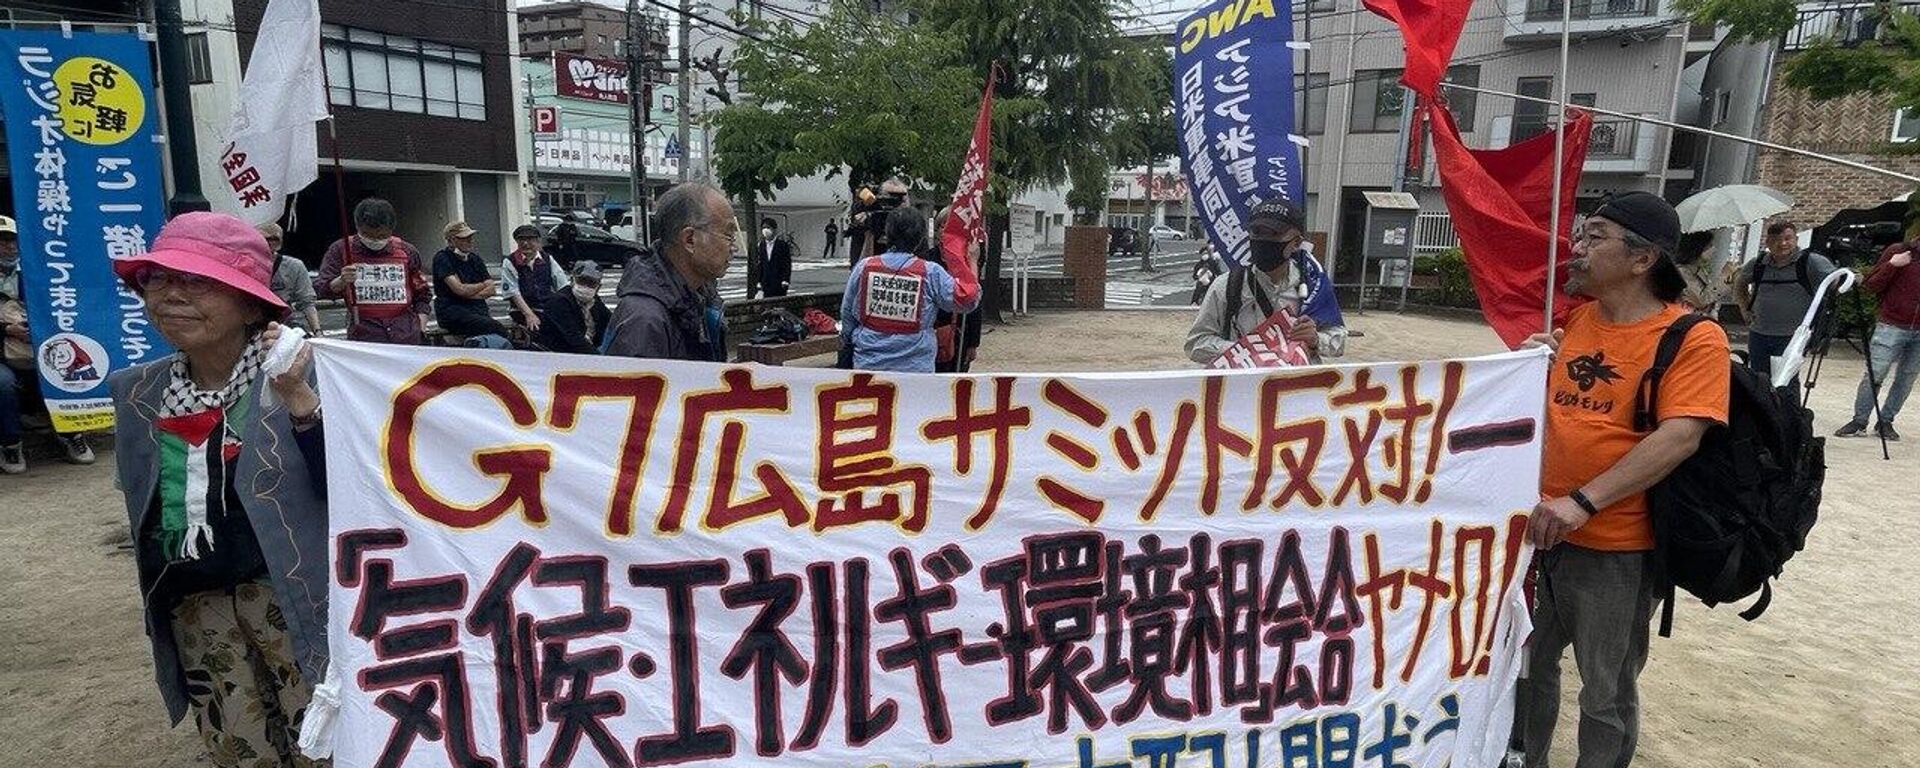 Hundreds of Japanese citizens take to the streets in the city of Hiroshima to protest against the upcoming G7 Summit from May 19 to 21 - Sputnik International, 1920, 19.05.2023